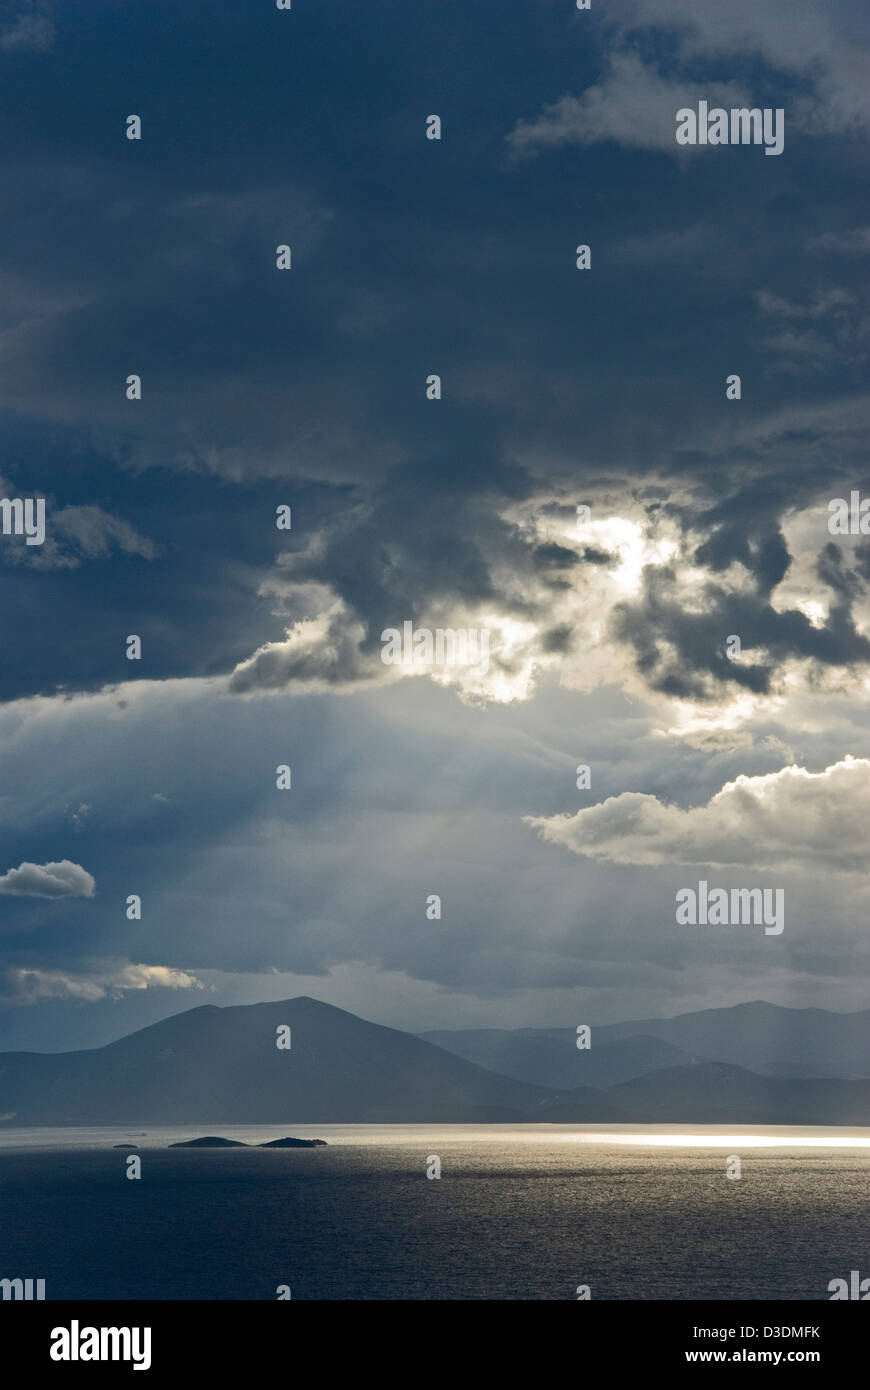 Dramatic sky above sea and mountains Stock Photo